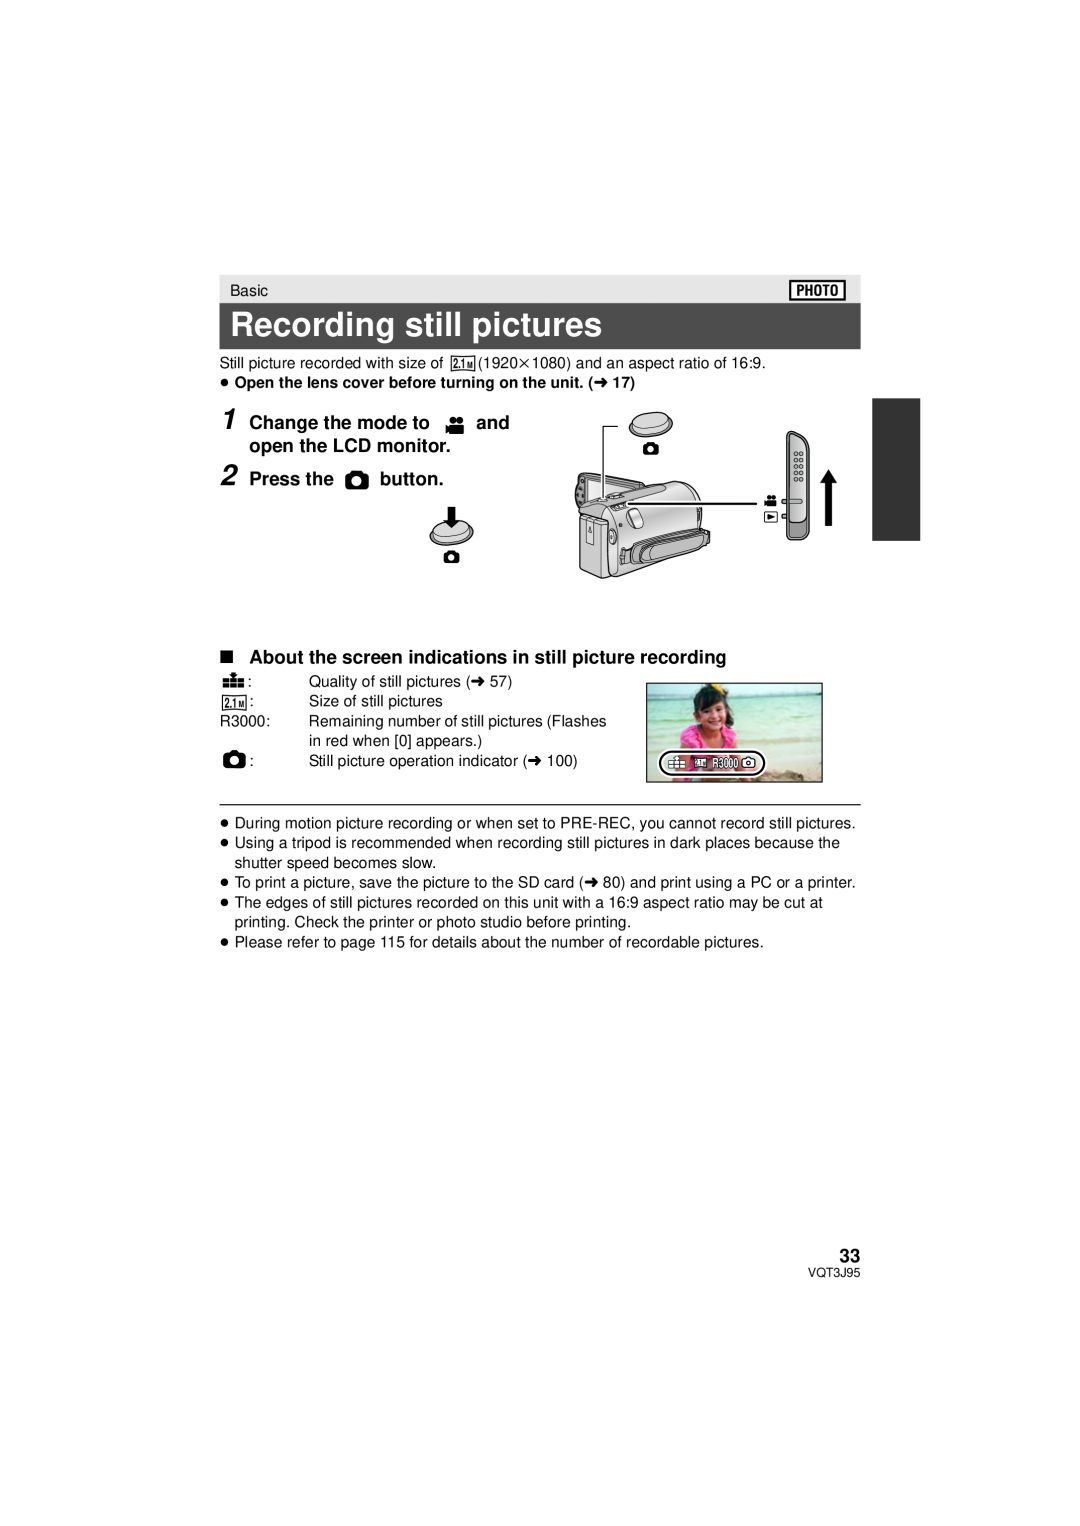 Panasonic HDC-SD40P/PC, HDC-TM41P/PC Recording still pictures, Press the button, Change the mode to, open the LCD monitor 